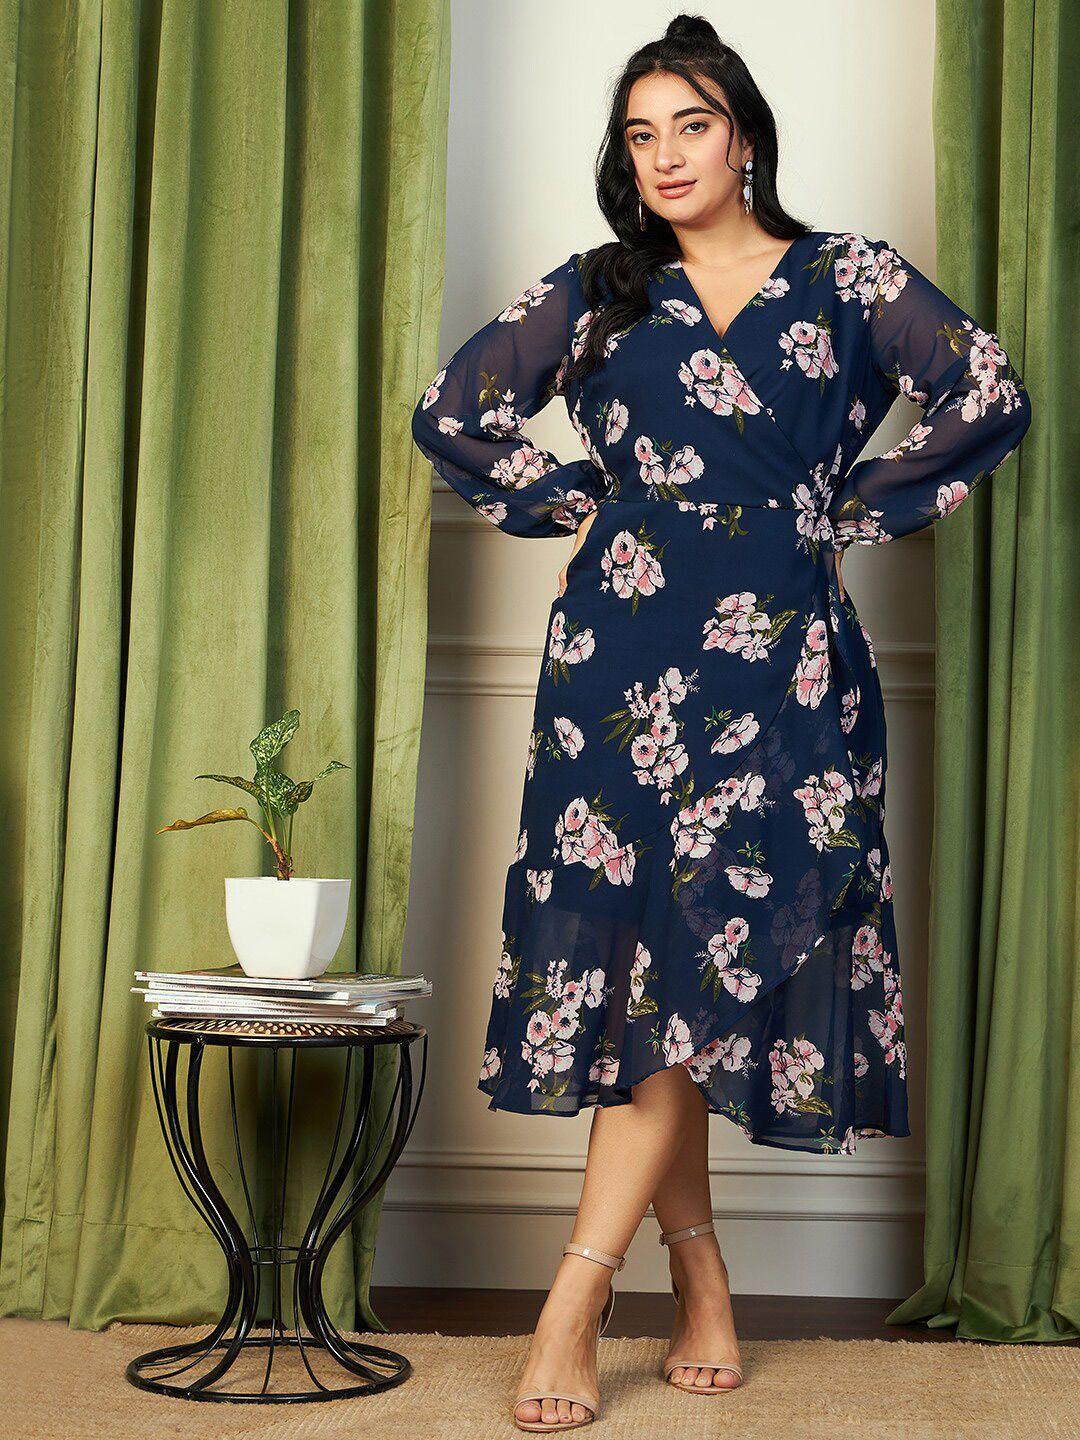 curve-by-kassually-floral-printed-ruffled-georgette-wrap-dress